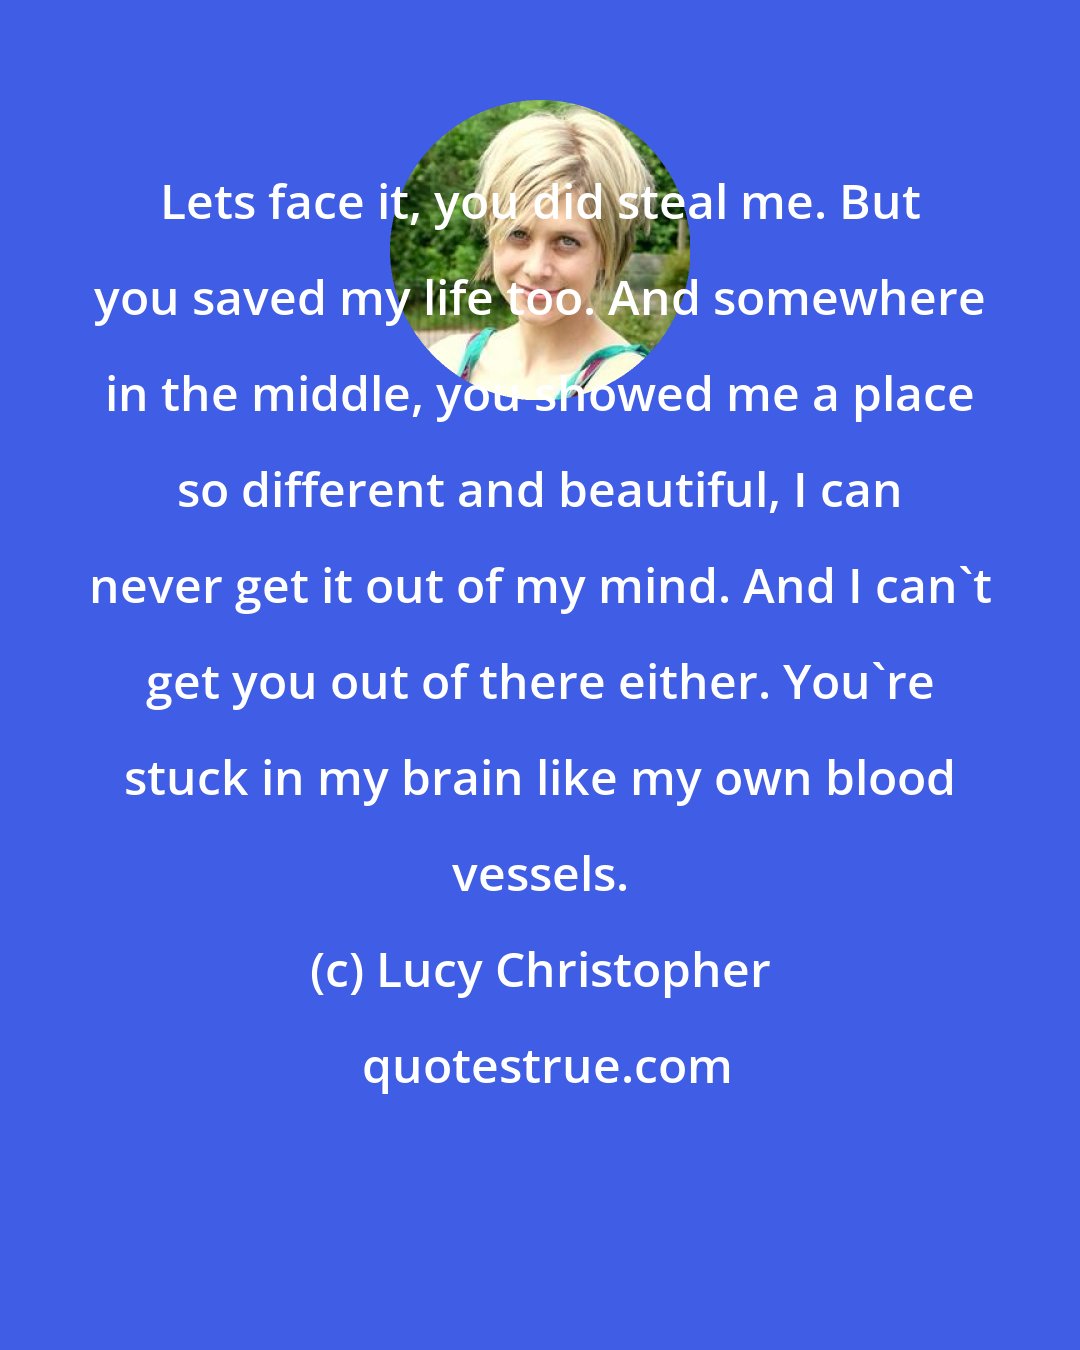 Lucy Christopher: Lets face it, you did steal me. But you saved my life too. And somewhere in the middle, you showed me a place so different and beautiful, I can never get it out of my mind. And I can't get you out of there either. You're stuck in my brain like my own blood vessels.